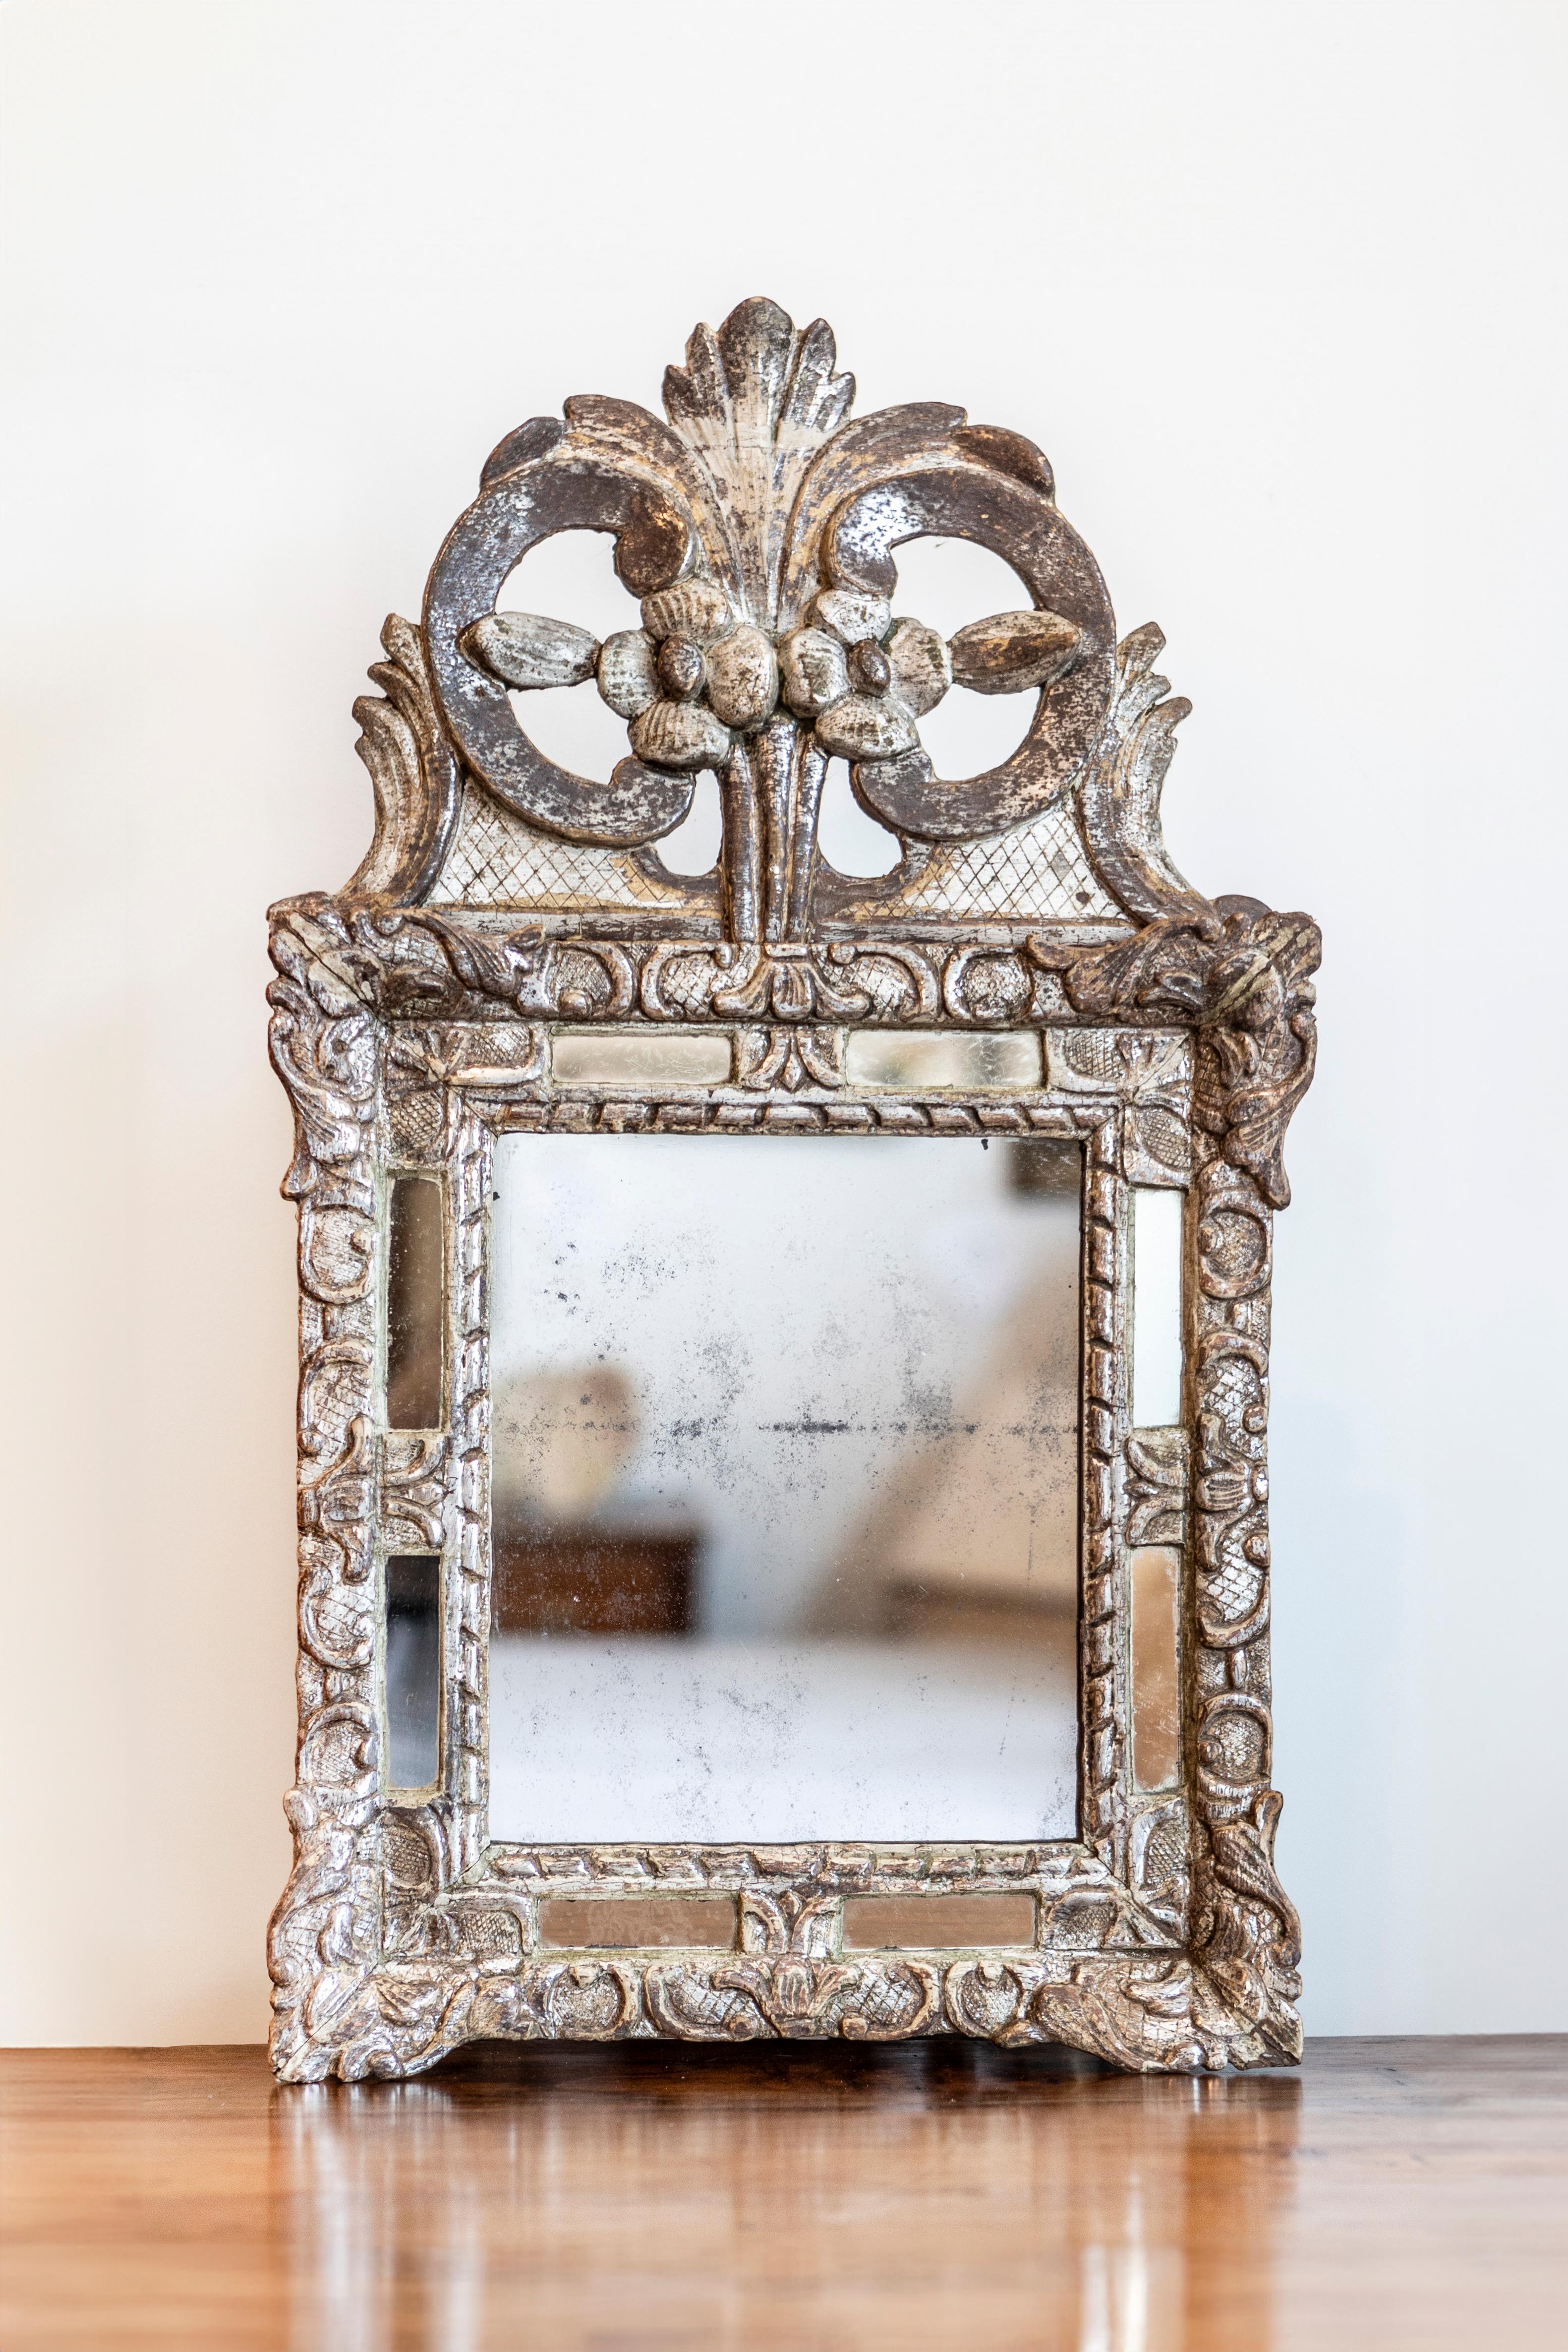 A French Régence period silver parcel gilt mirror with carved floral crest. This exquisite French Régence period silver parcel gilt mirror is a testament to the elegant transitional style that bridges the grandeur of Louis XIV designs with the